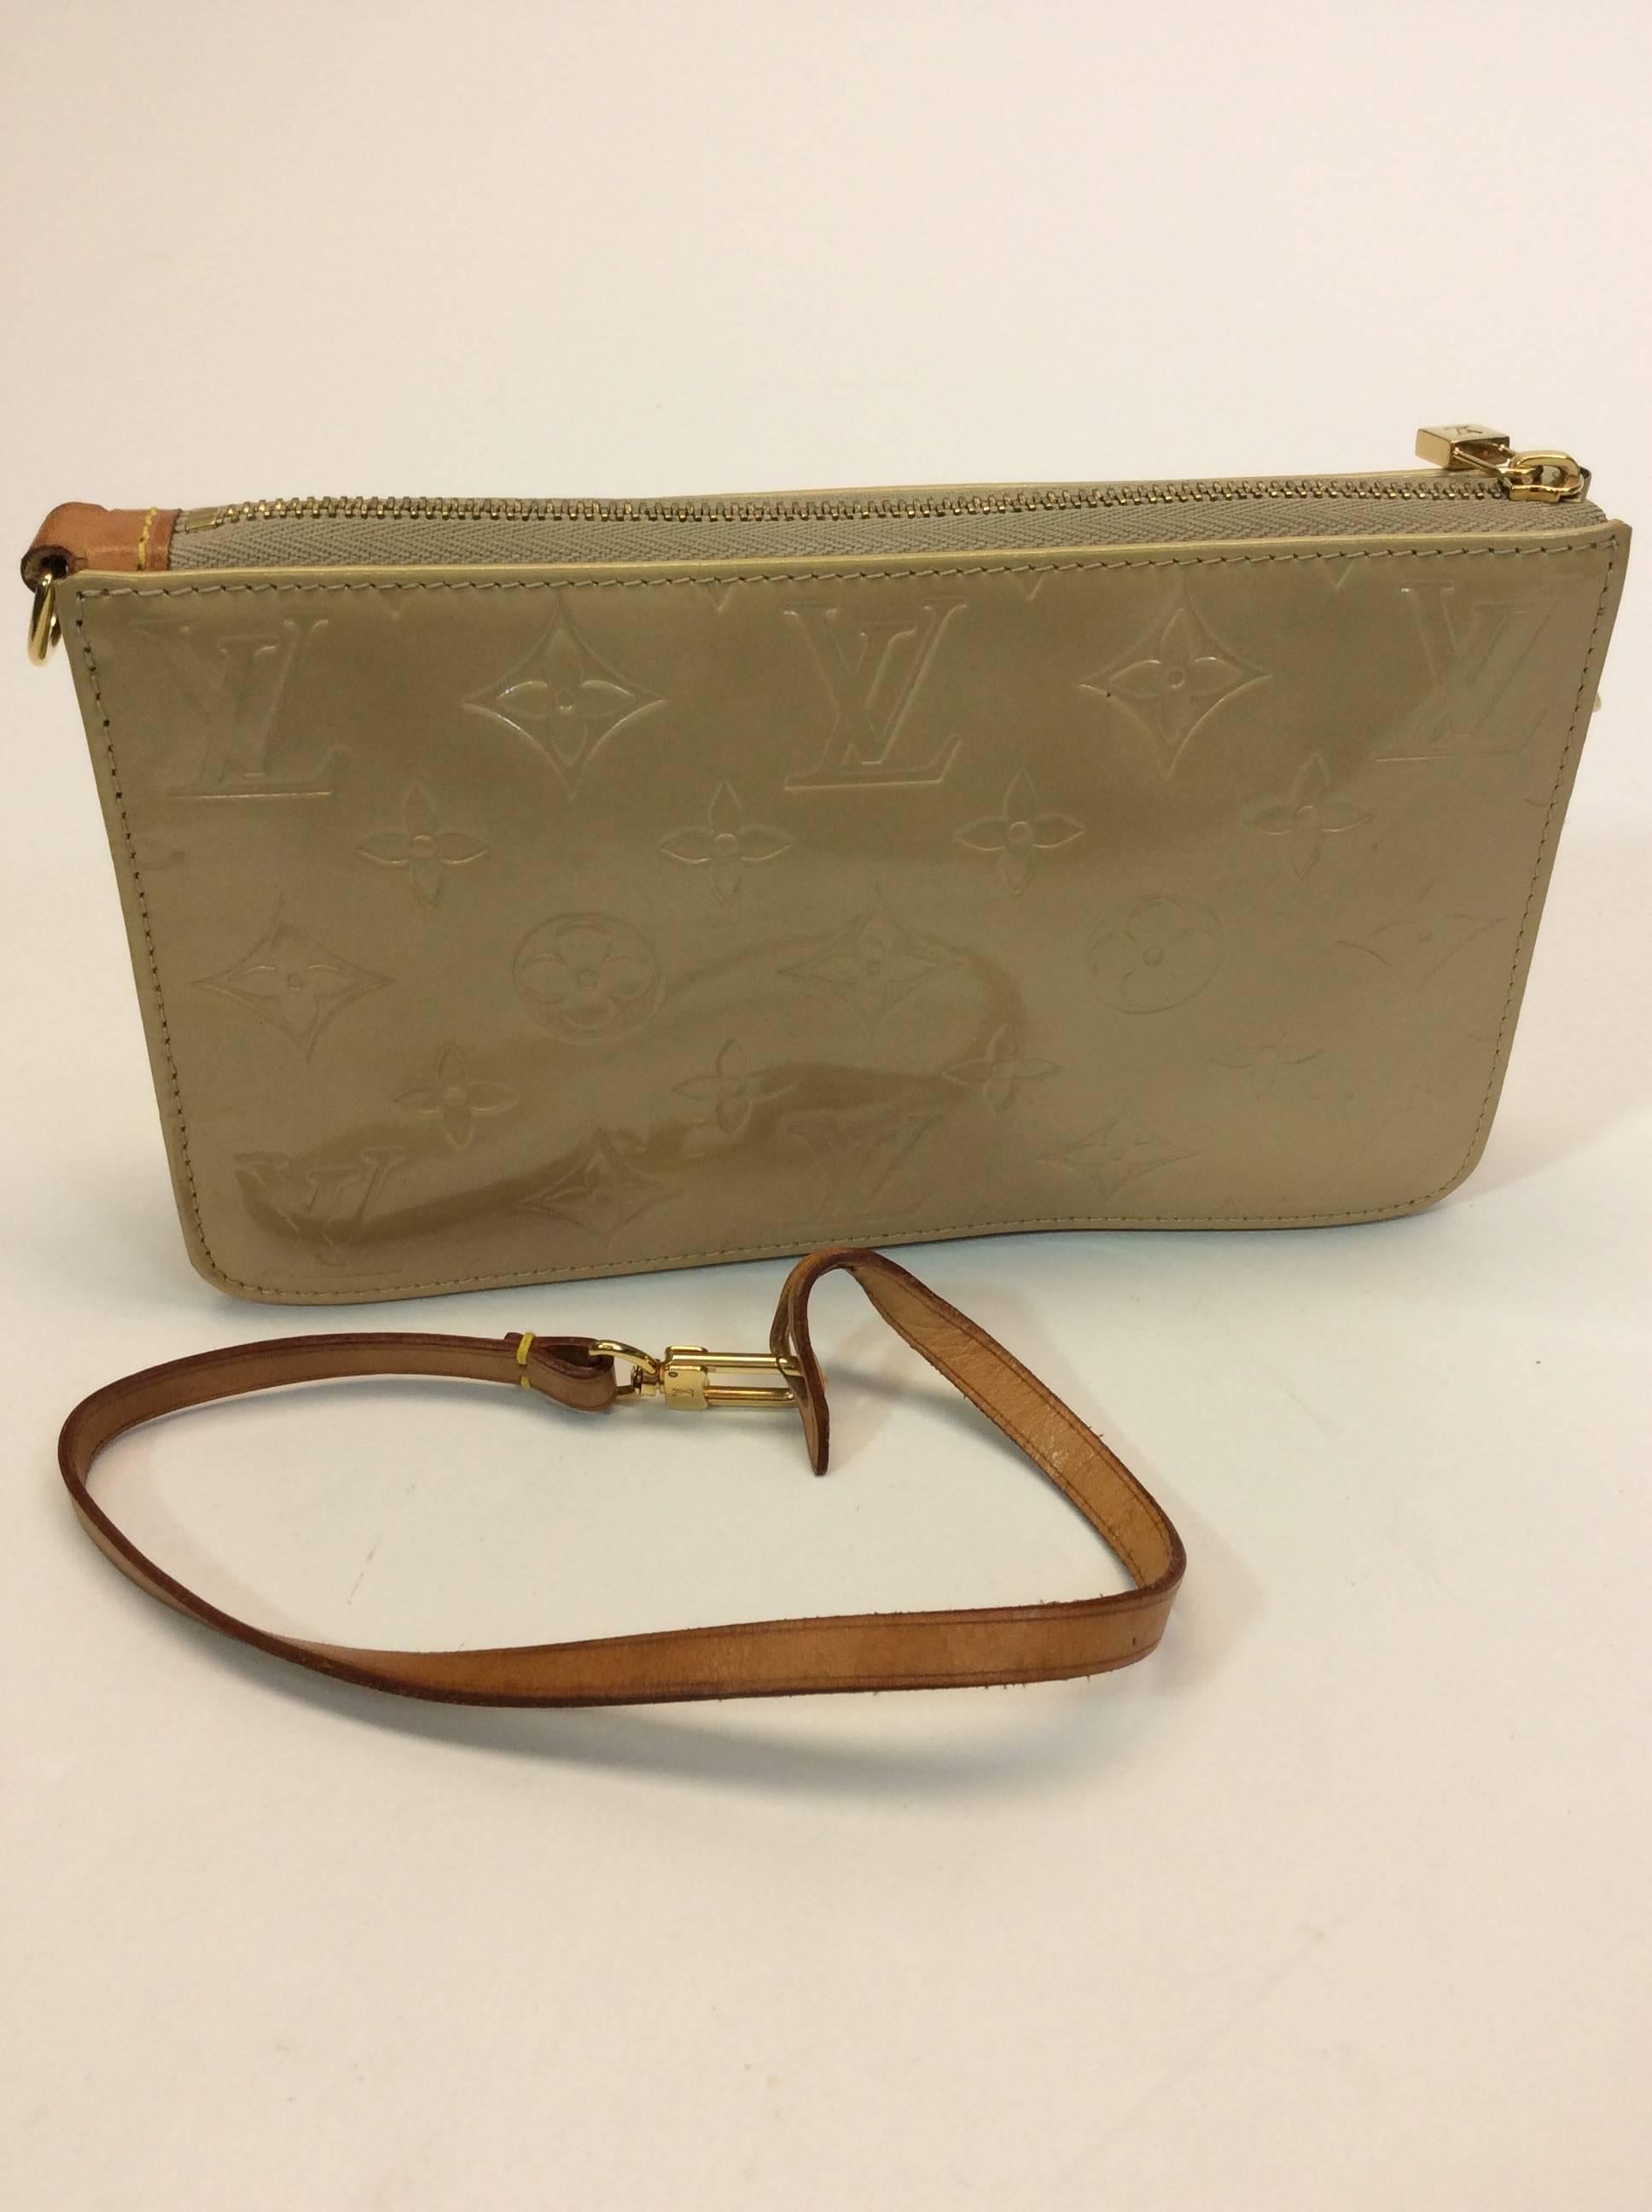 Louis Vuitton Small Tan Patent Leather Monogrammed Handbag For Sale 1